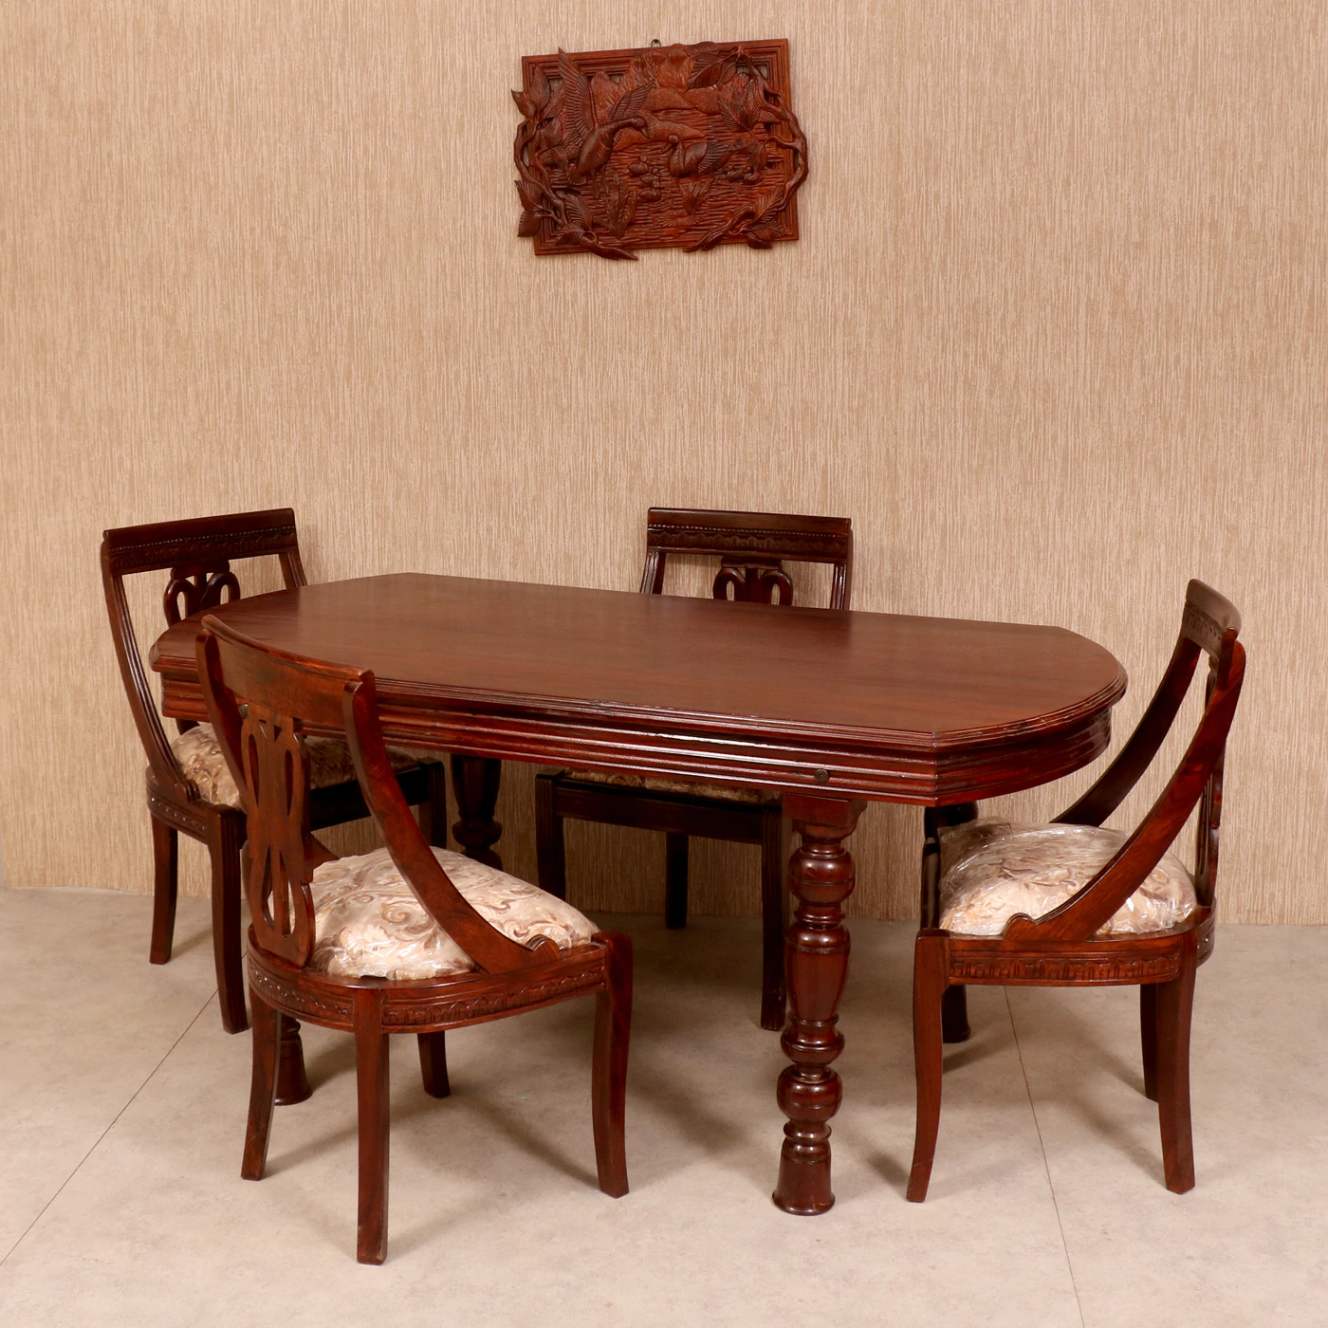 Wooden Dining Table Design for Home & Office